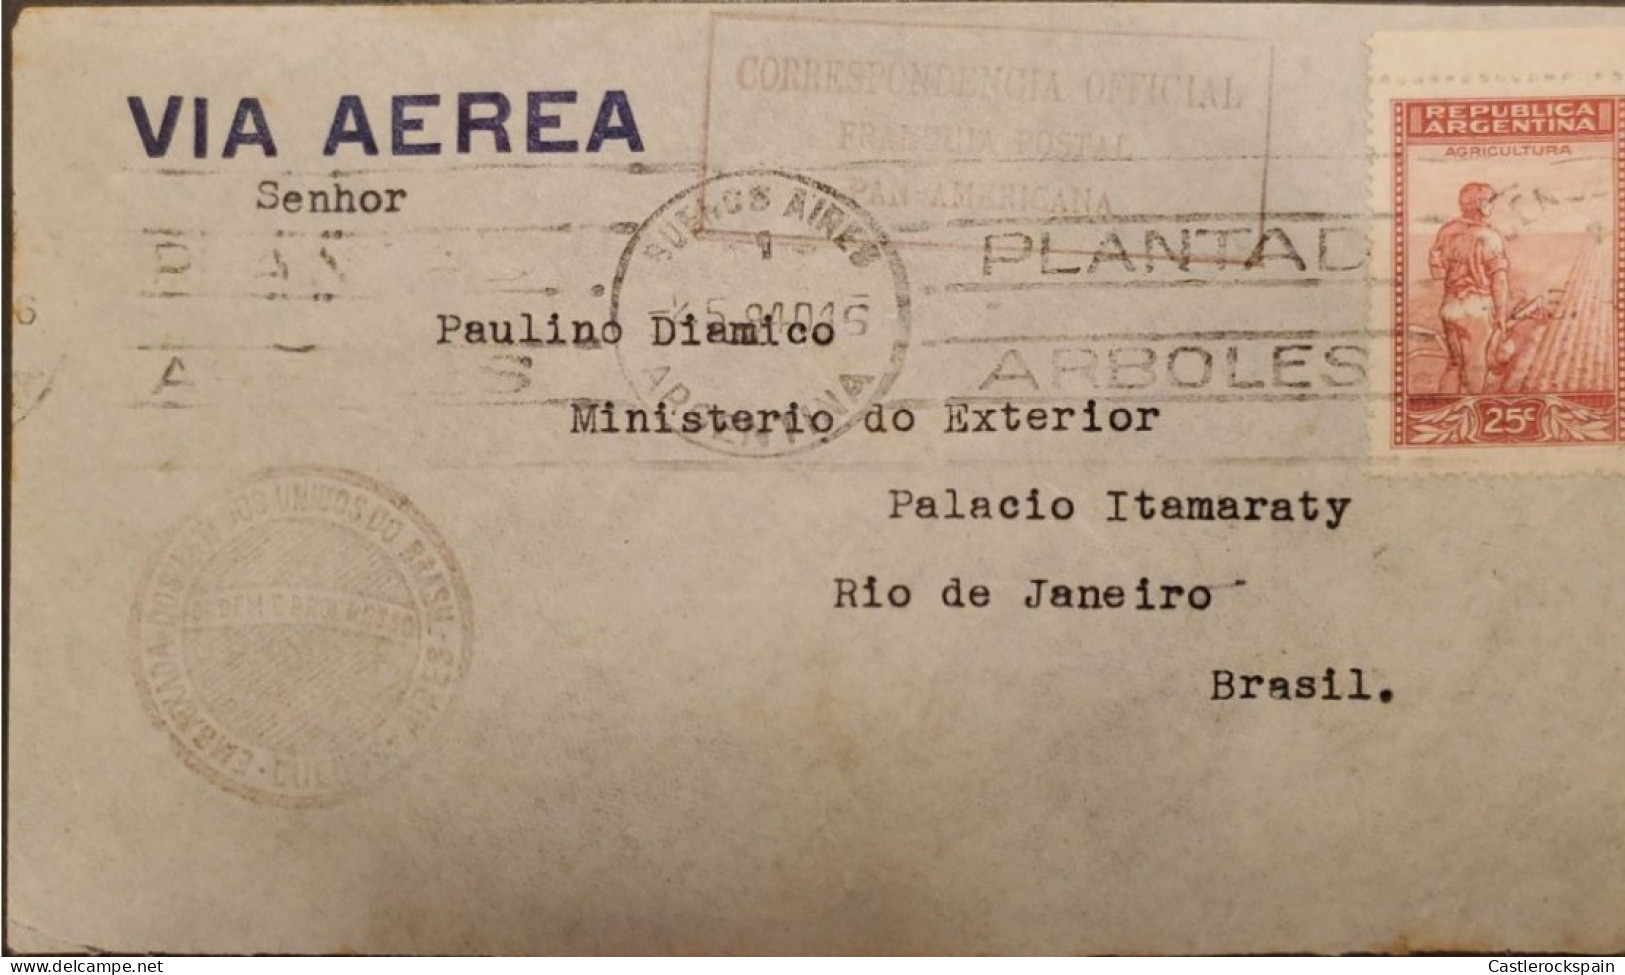 MI) 1946, ARGENTINA, FROM BUENOS AIRES TO RIO DE JANEIRO - BRAZIL, AIR MAIL, WITH SLOGAN AND OTHER CANCELLATION STAMPS, - Oblitérés